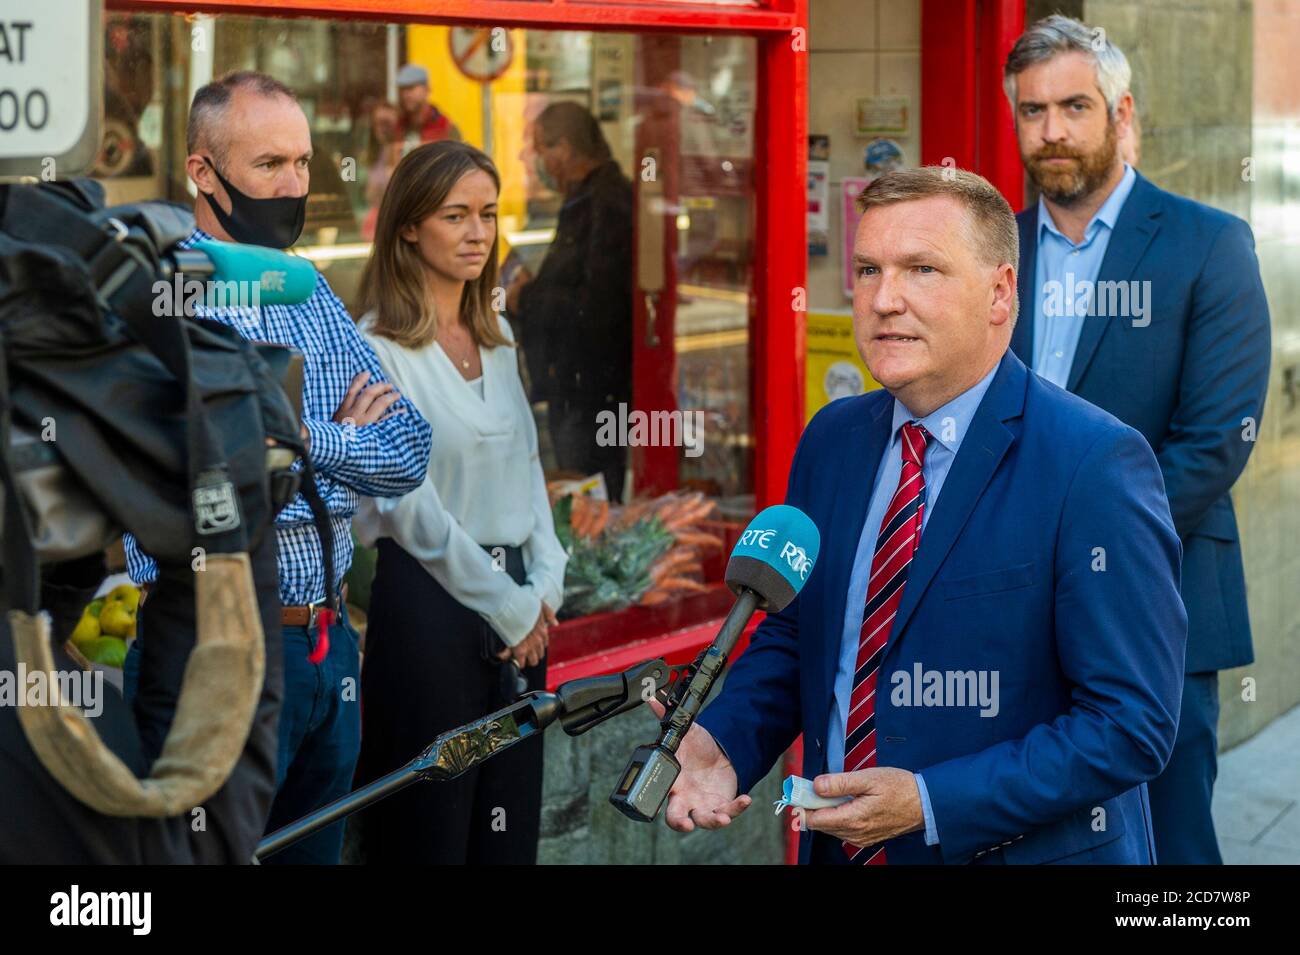 Bantry, West Cork, Ireland. 27th Aug, 2020. The Minister for Public Expenditure, Michael McGrath TD (FF), visited  Bantry today to see the flood damage caused by Storm Francis on Monday last. Minister McGrath speaks to RTE. Credit: AG News/Alamy Live News Stock Photo